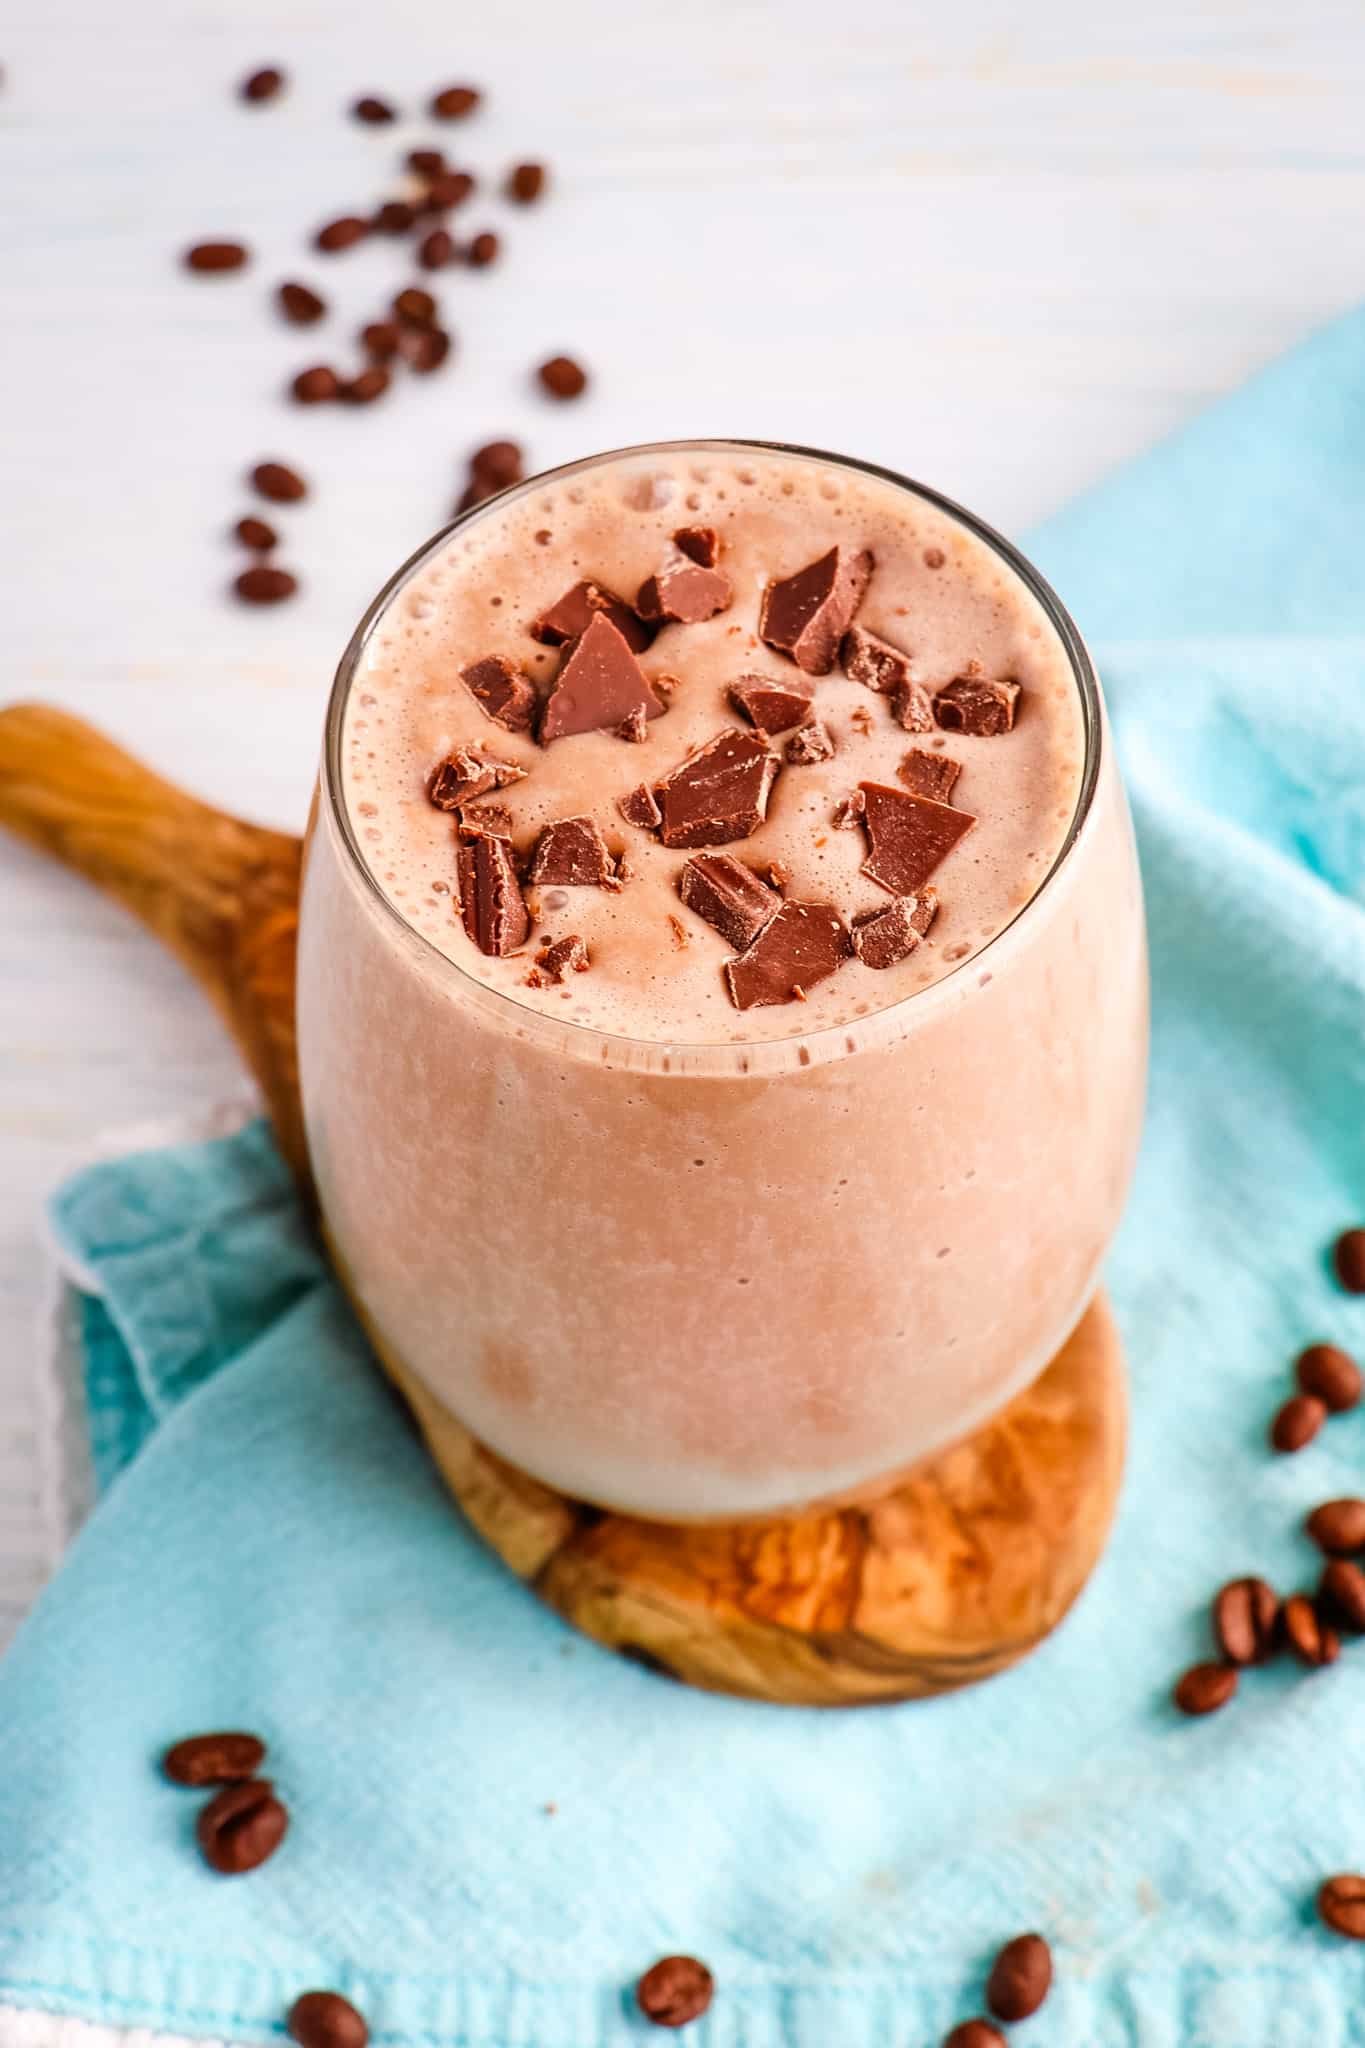 Mocha smoothie in a clear glass topped with chocolate chunks and coffee beans on the side.